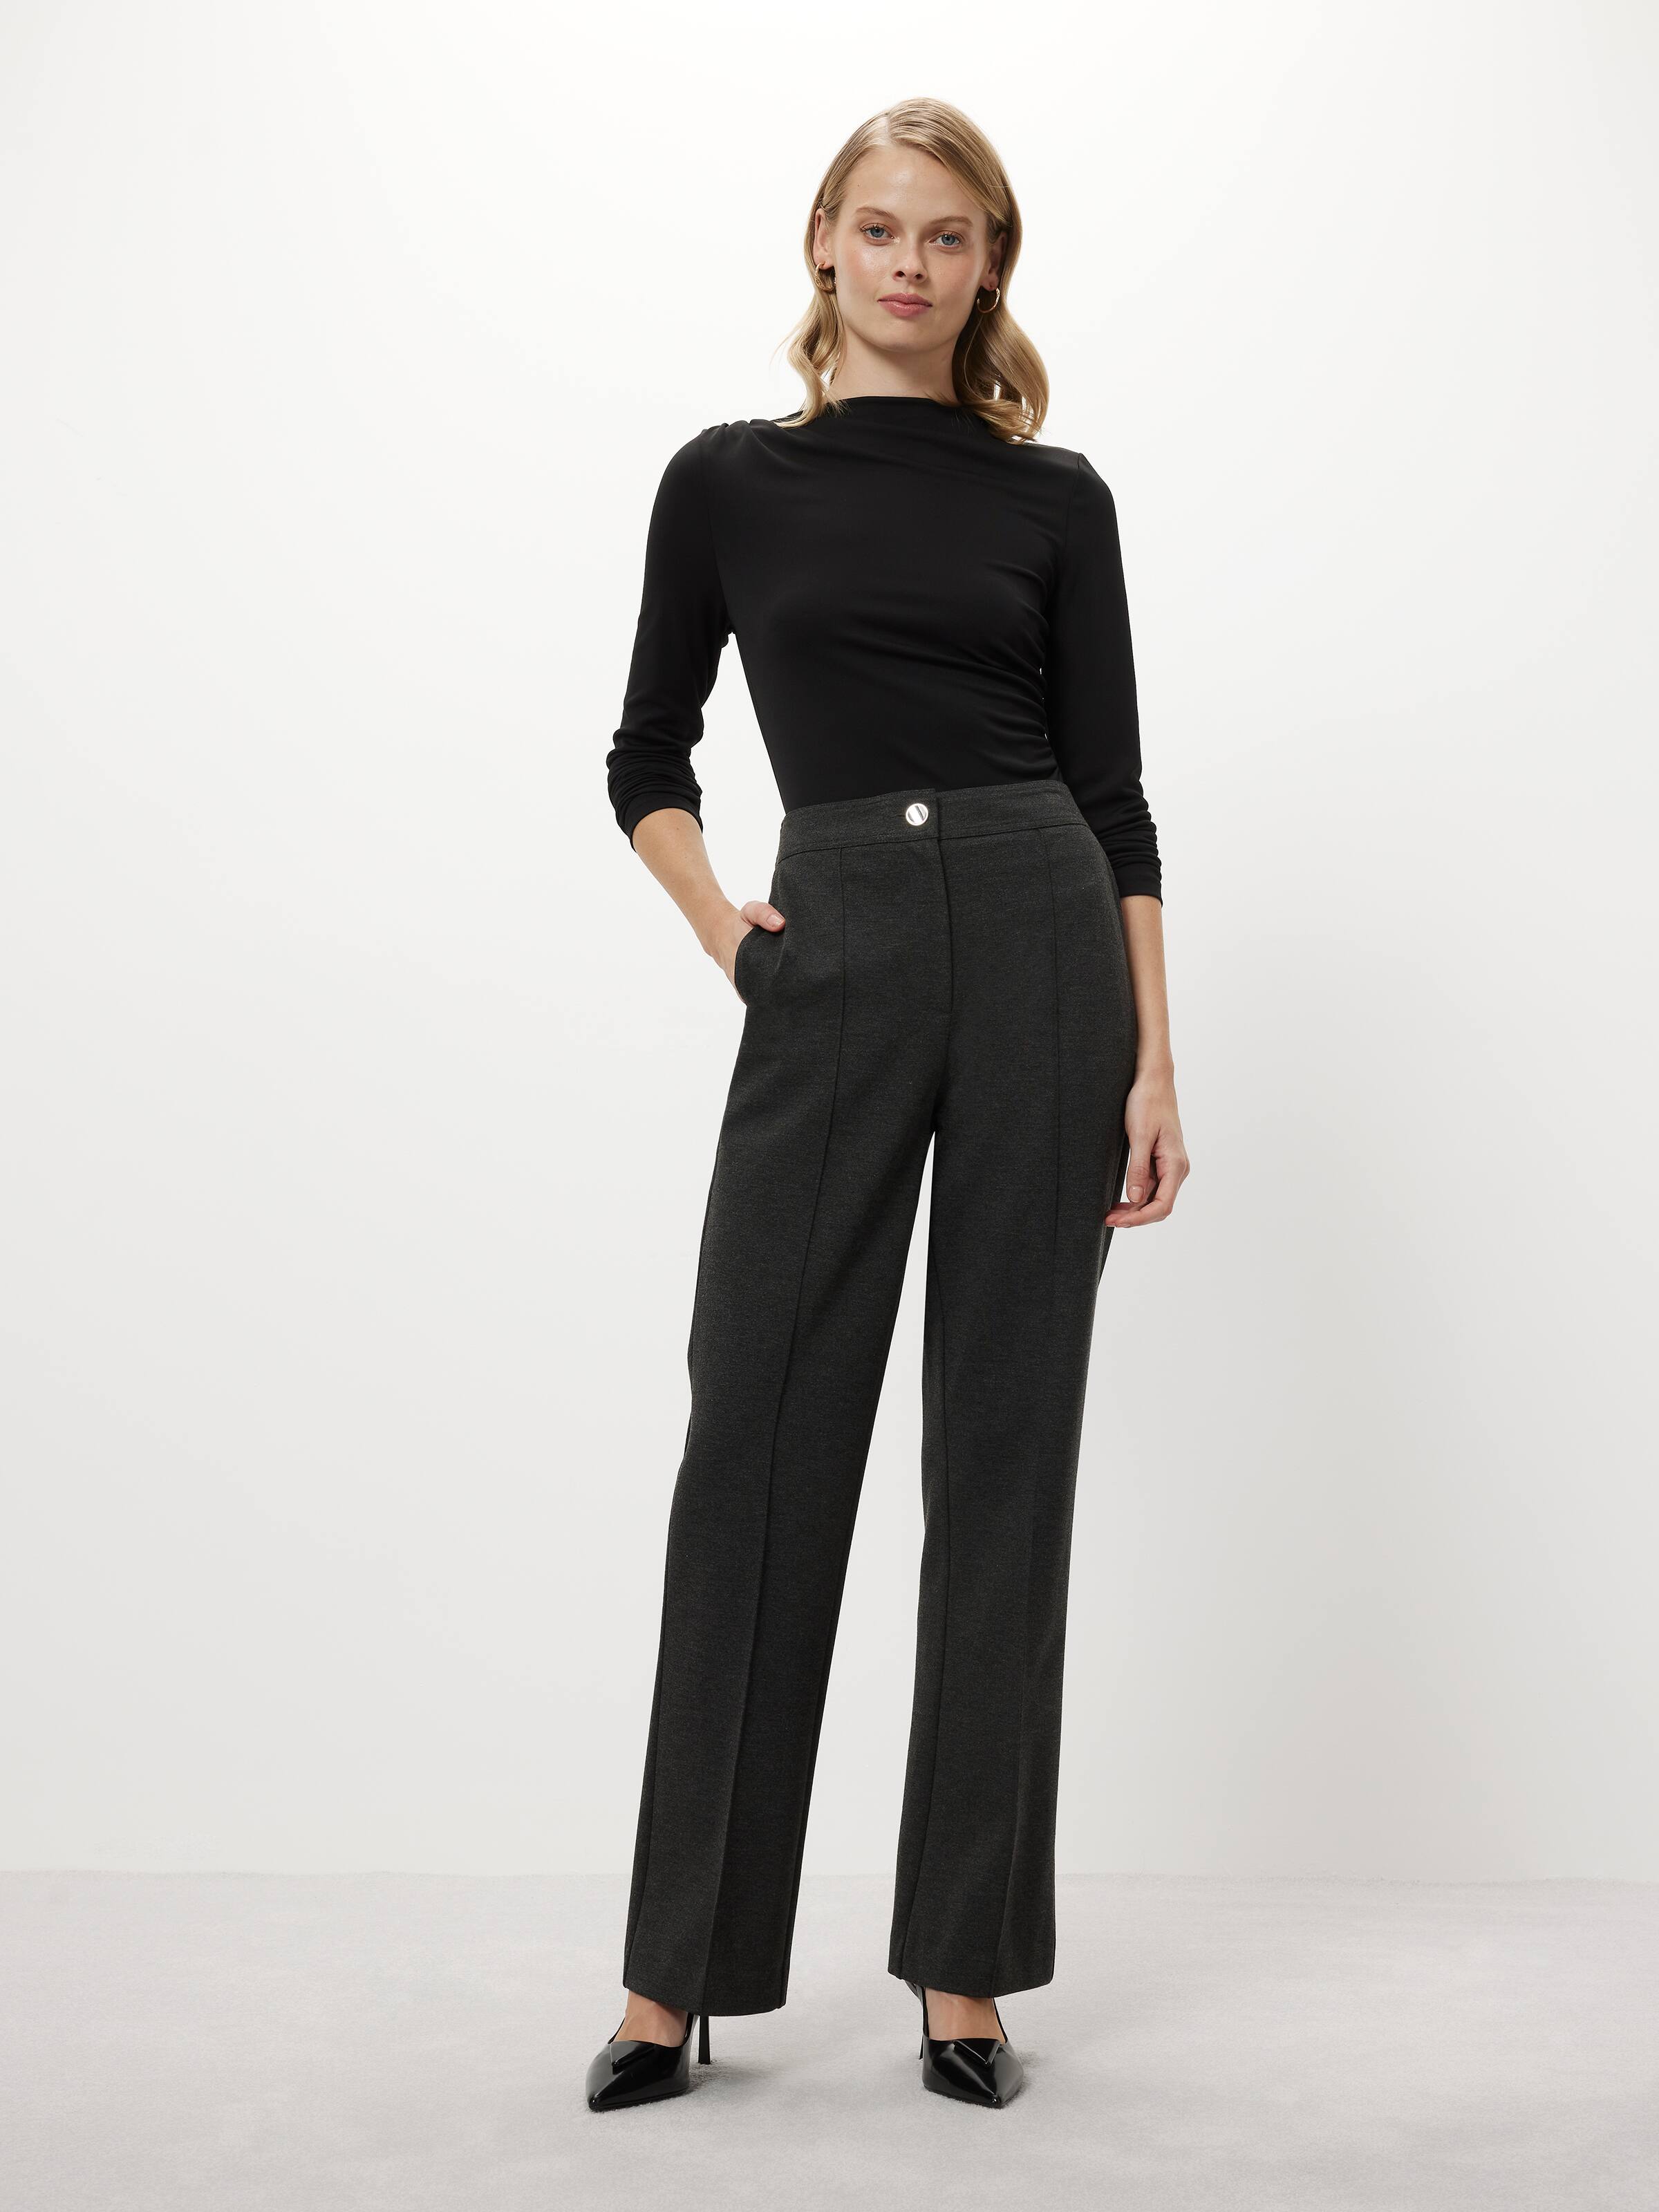 Due Per Due Collection Size 14 Womens Black Silk Pants